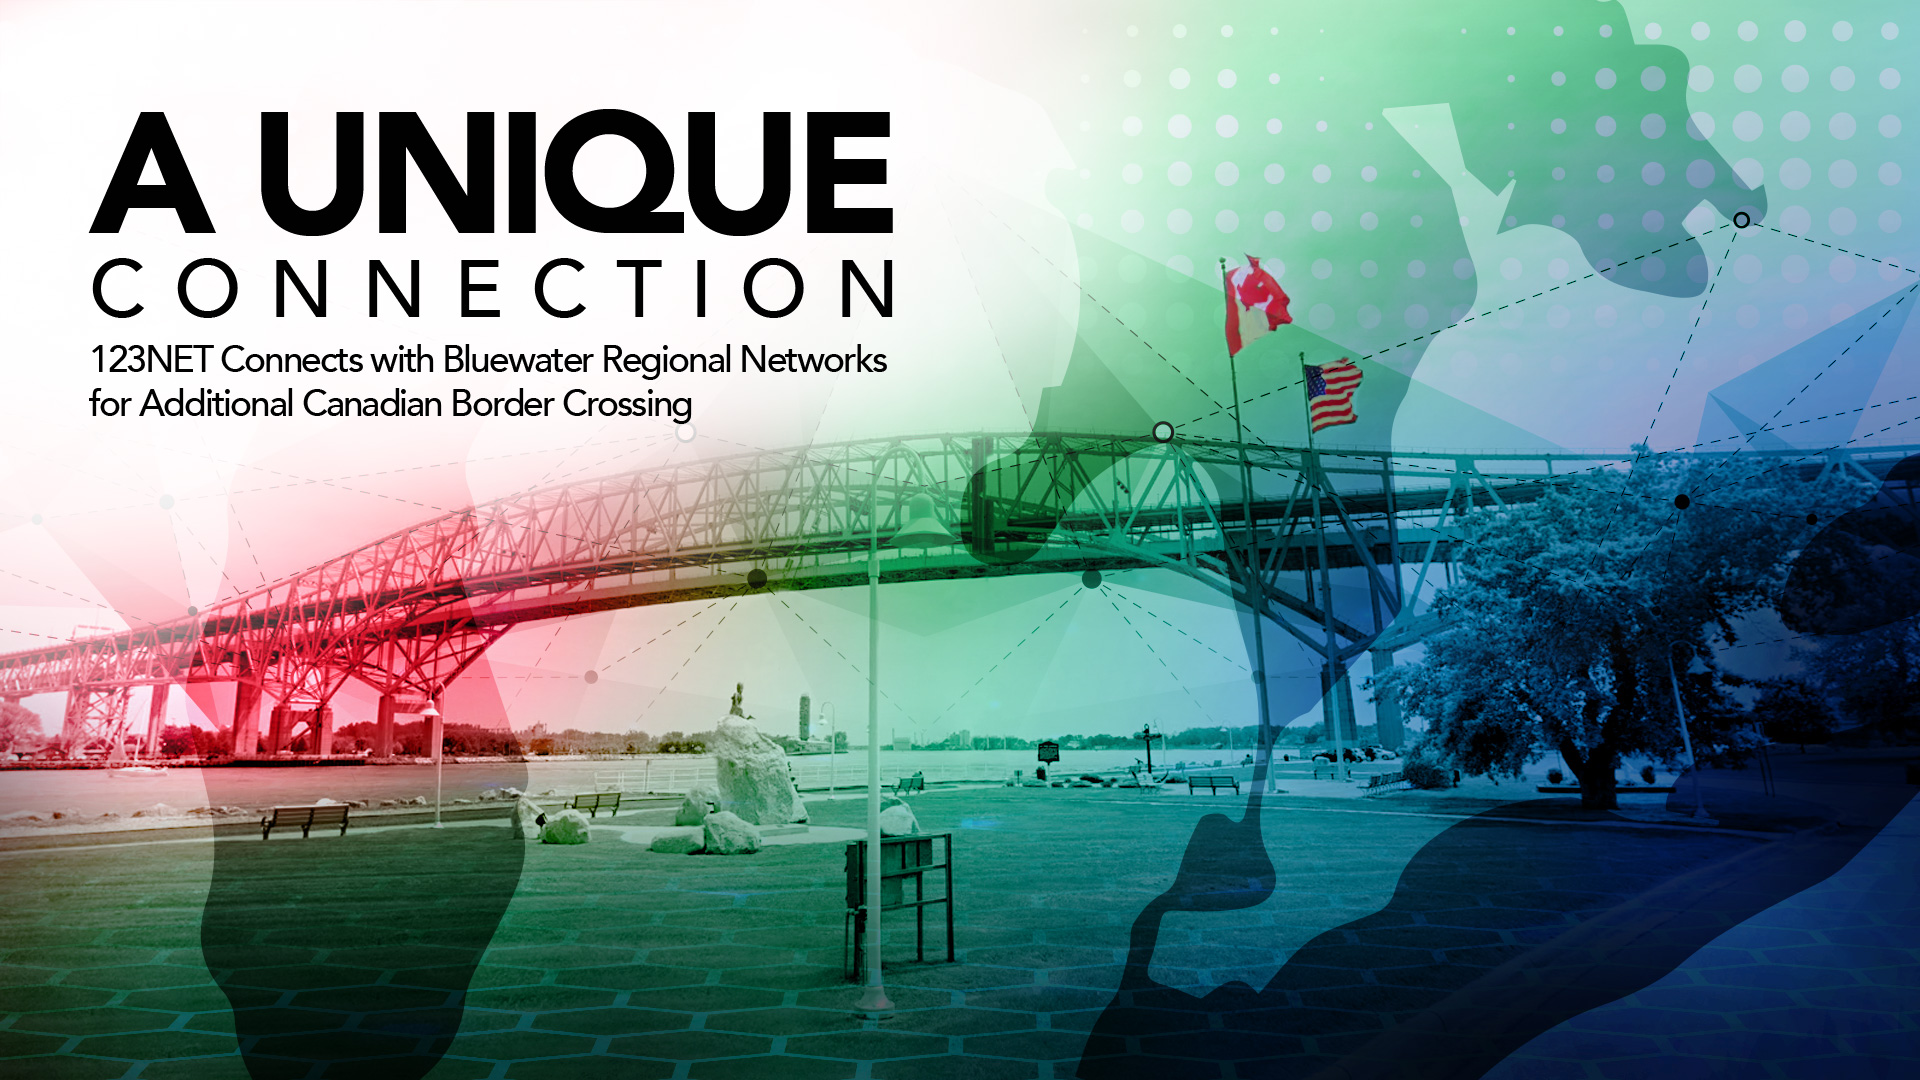 A Unique Connection: 123NET Connects with Bluewater Regional Networks for Additional Canadian Border Crossing